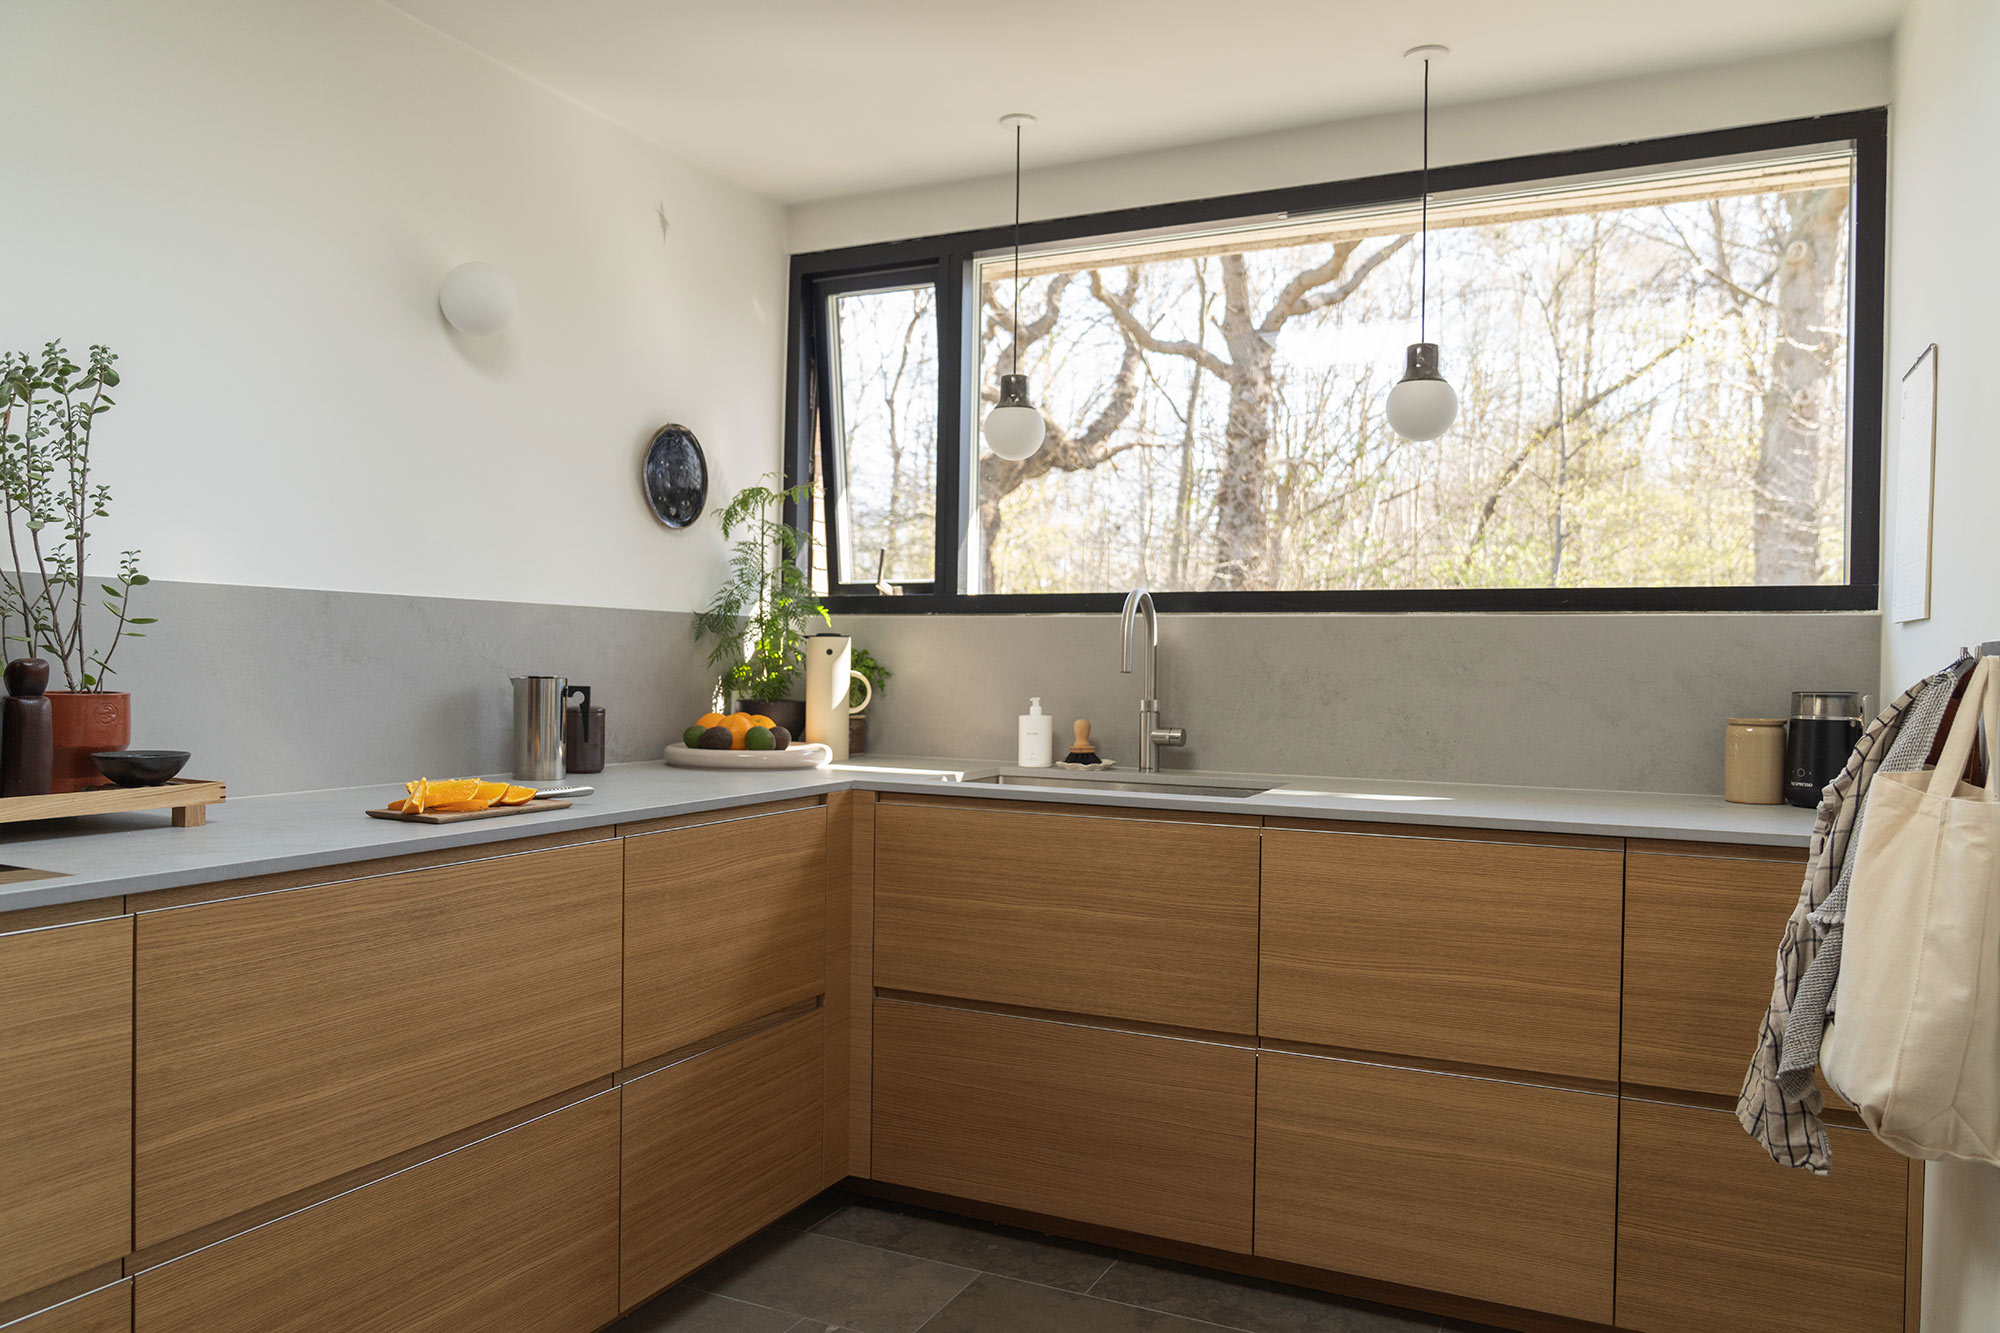 Image of Caroline Bahrenscheer 1 in An ultra-resistant delicate kitchen - Cosentino